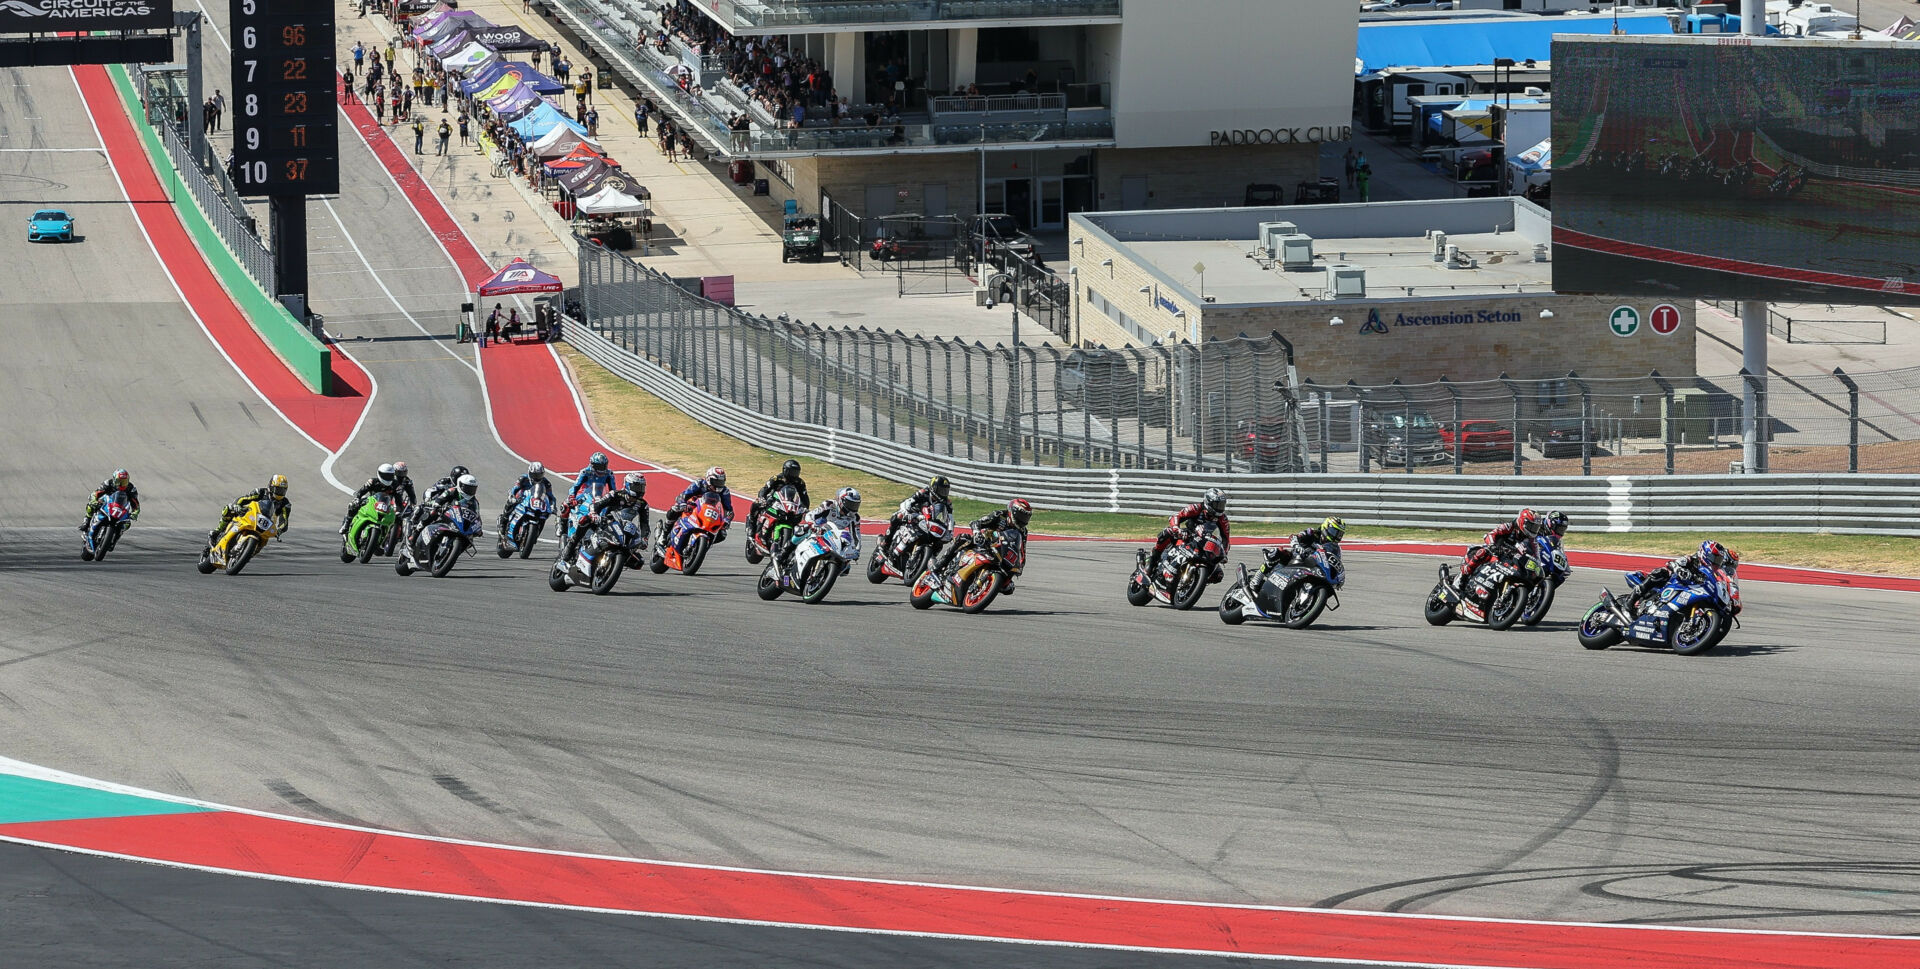 The start of MotoAmerica Superbike Race One at COTA with Jake Gagne (1) and Josh Herrin (2) fighting for the lead into Turn One ahead of Richie Escalante (54), JD Beach (95), PJ Jacobsen (99), Brandon Paasch (96), Mathew Scholtz (11), and the rest. Photo by Brian J. Nelson.